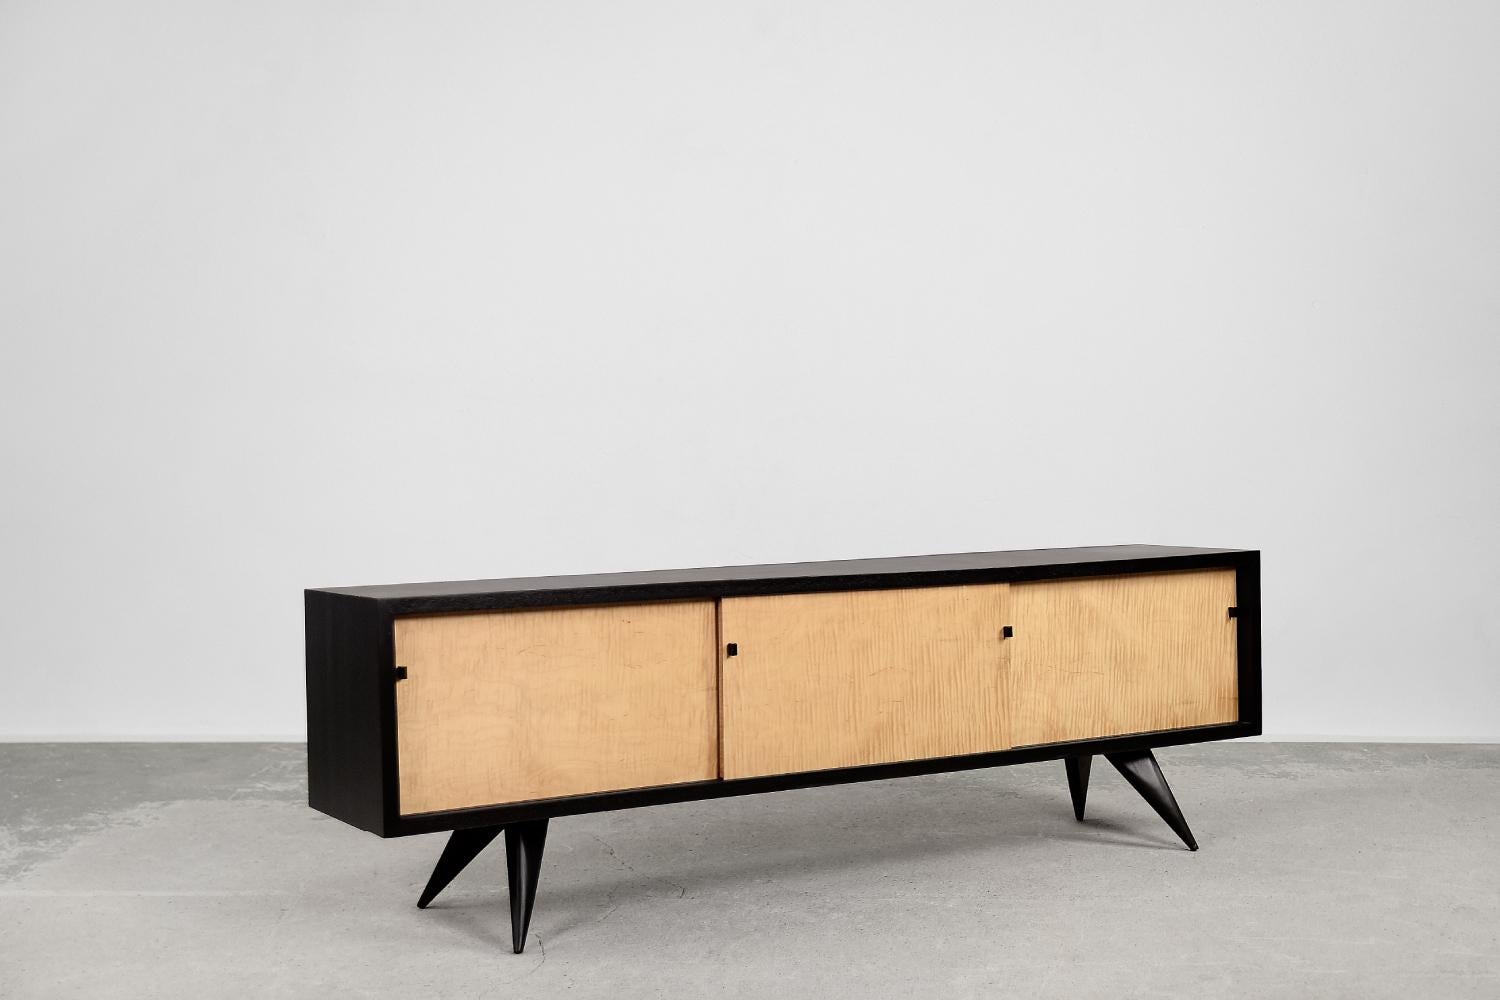 This modernist Mid-Century vintage sideboard was made in Scandinavia during the 1960s. The chest is made of high-quality wood with visible grain and black lacquered. The front is made of maple wood, which has a rare and noble appearance. The